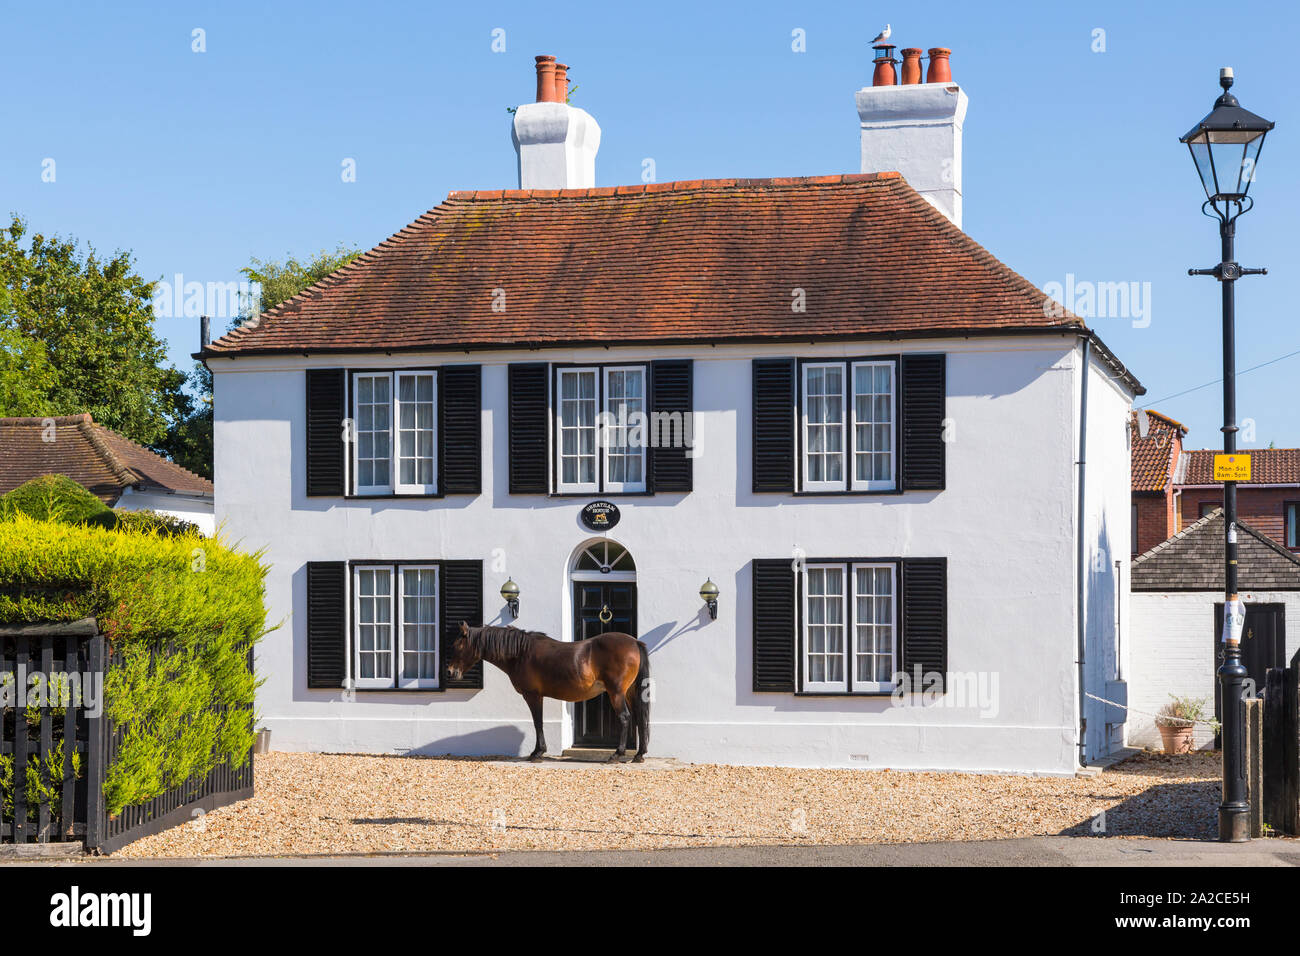 Who's looking through the window - horse standing outside Greatham House at Brockenhurst, New Forest, Hampshire, UK on a warm sunny day in September Stock Photo